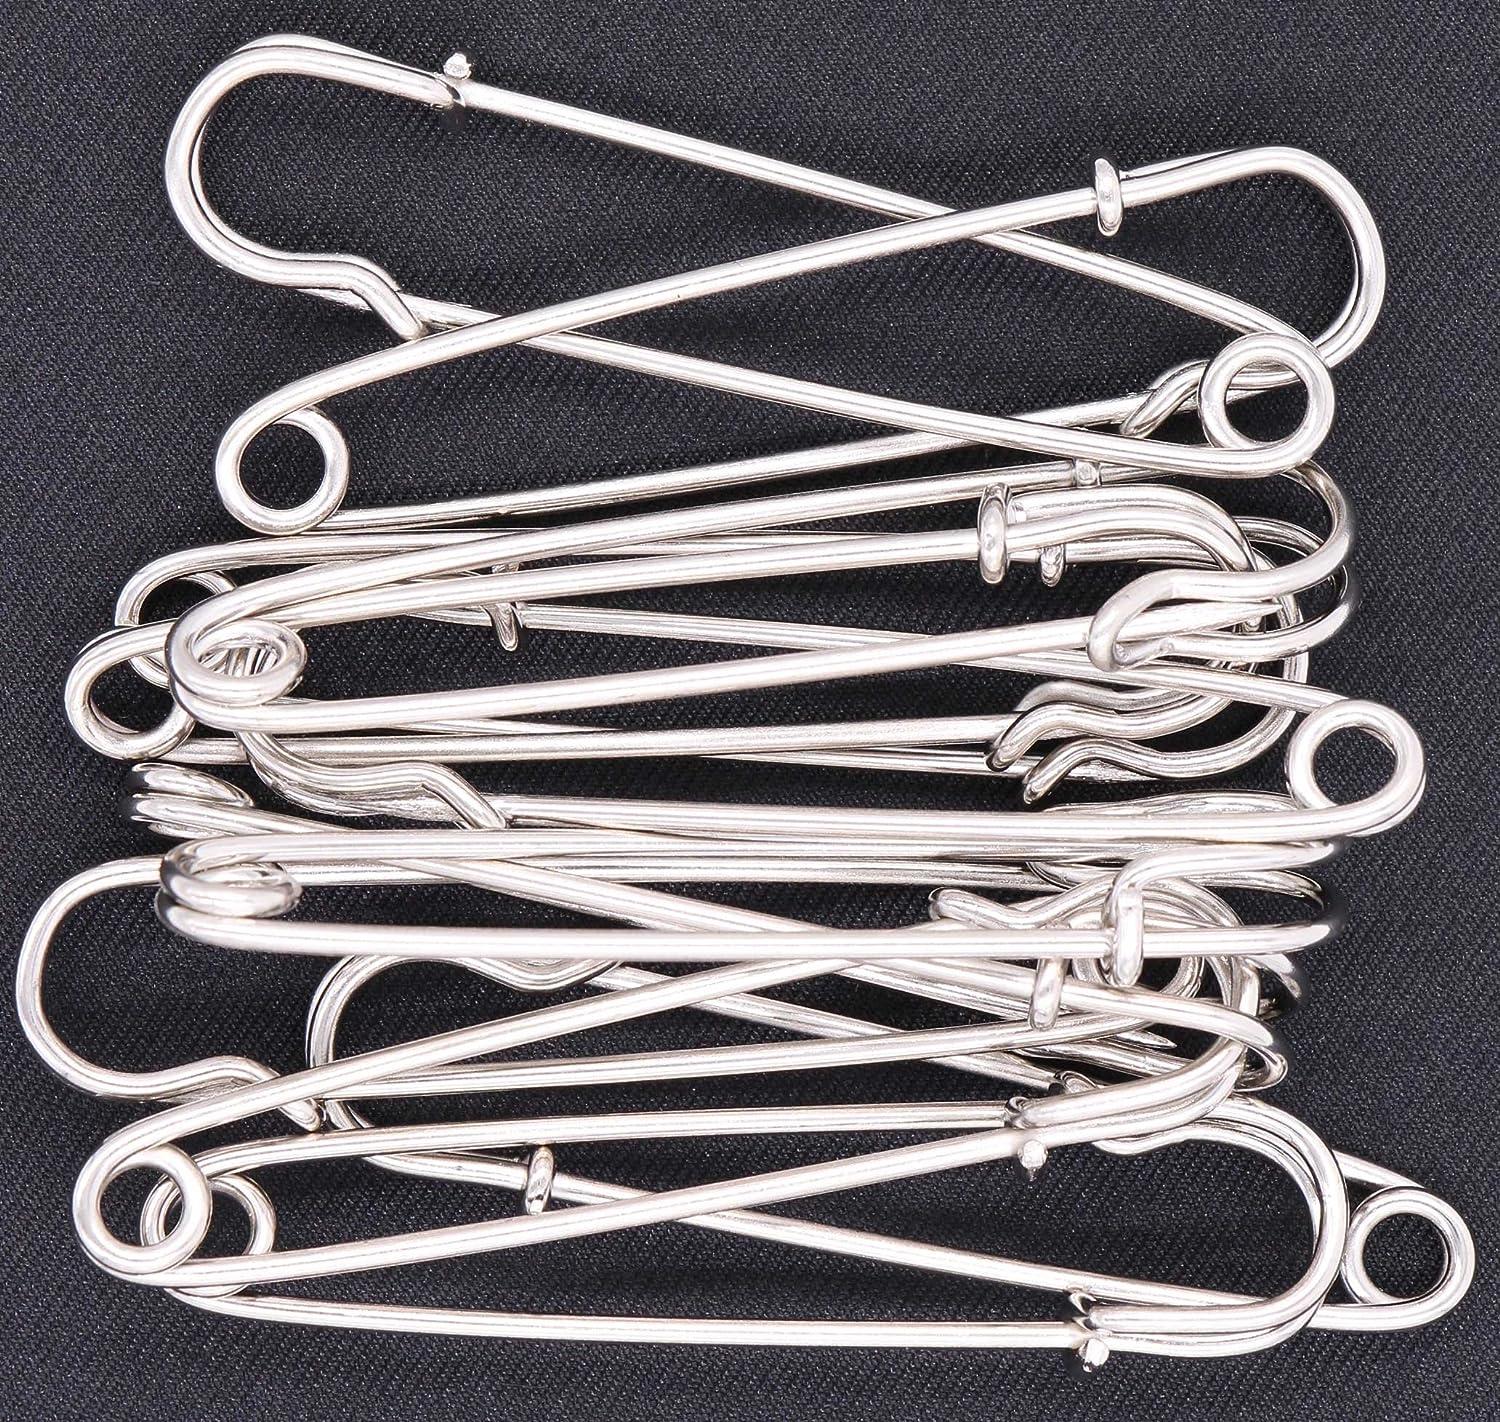 Heavy Duty Nickel Plated Stainless Steel Extra Large 4 Steel Safety Pins  For Blankets Skirts Kilts Crafts - Buy Heavy Duty Nickel Plated Stainless  Steel Extra Large 4 Steel Safety Pins For